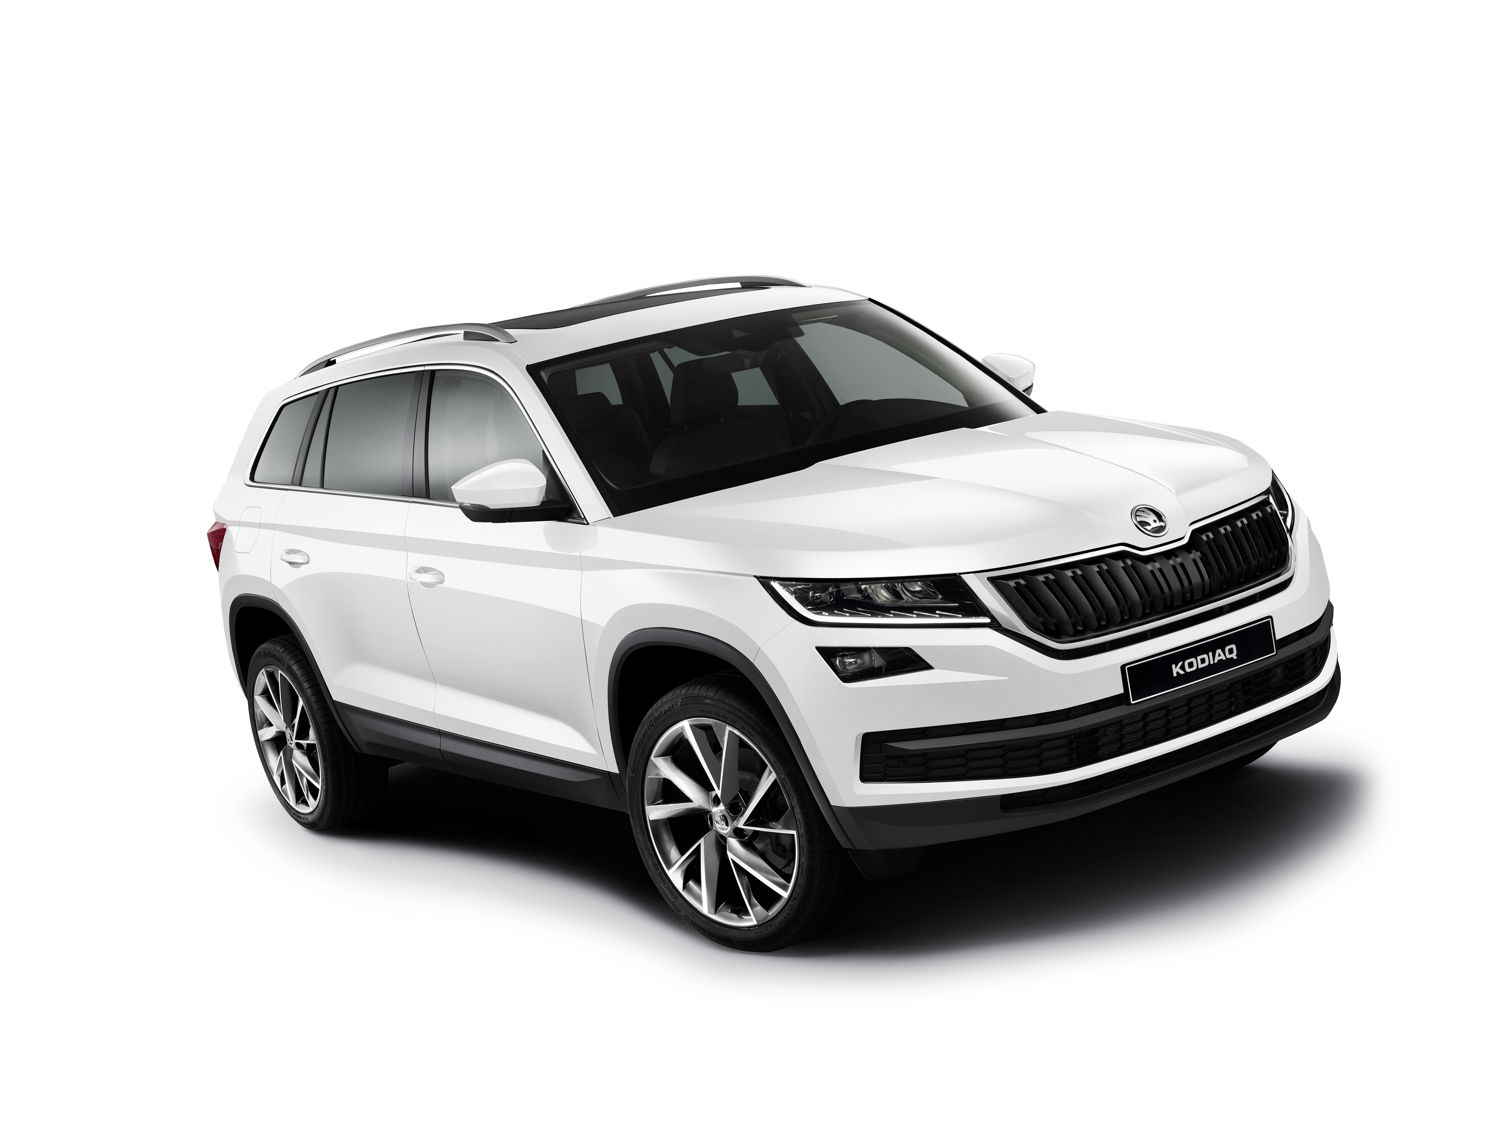 The ŠKODA KODIAQ (photo) has been one of the brand’s growth drivers since February. The introduction of the ŠKODA KAROQ compact SUV follows in October.